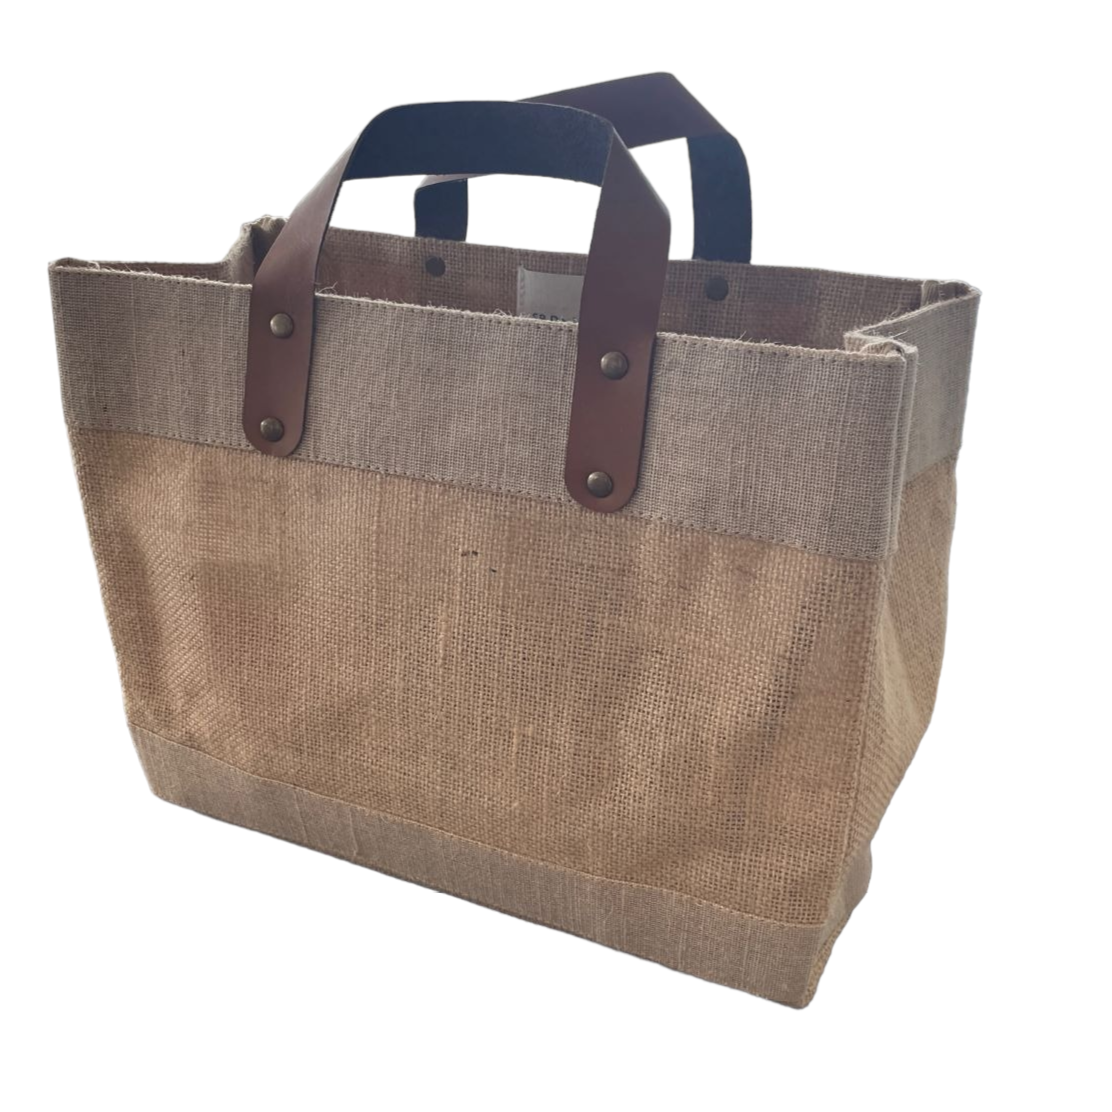 The Leather Small Cement Tote Bag